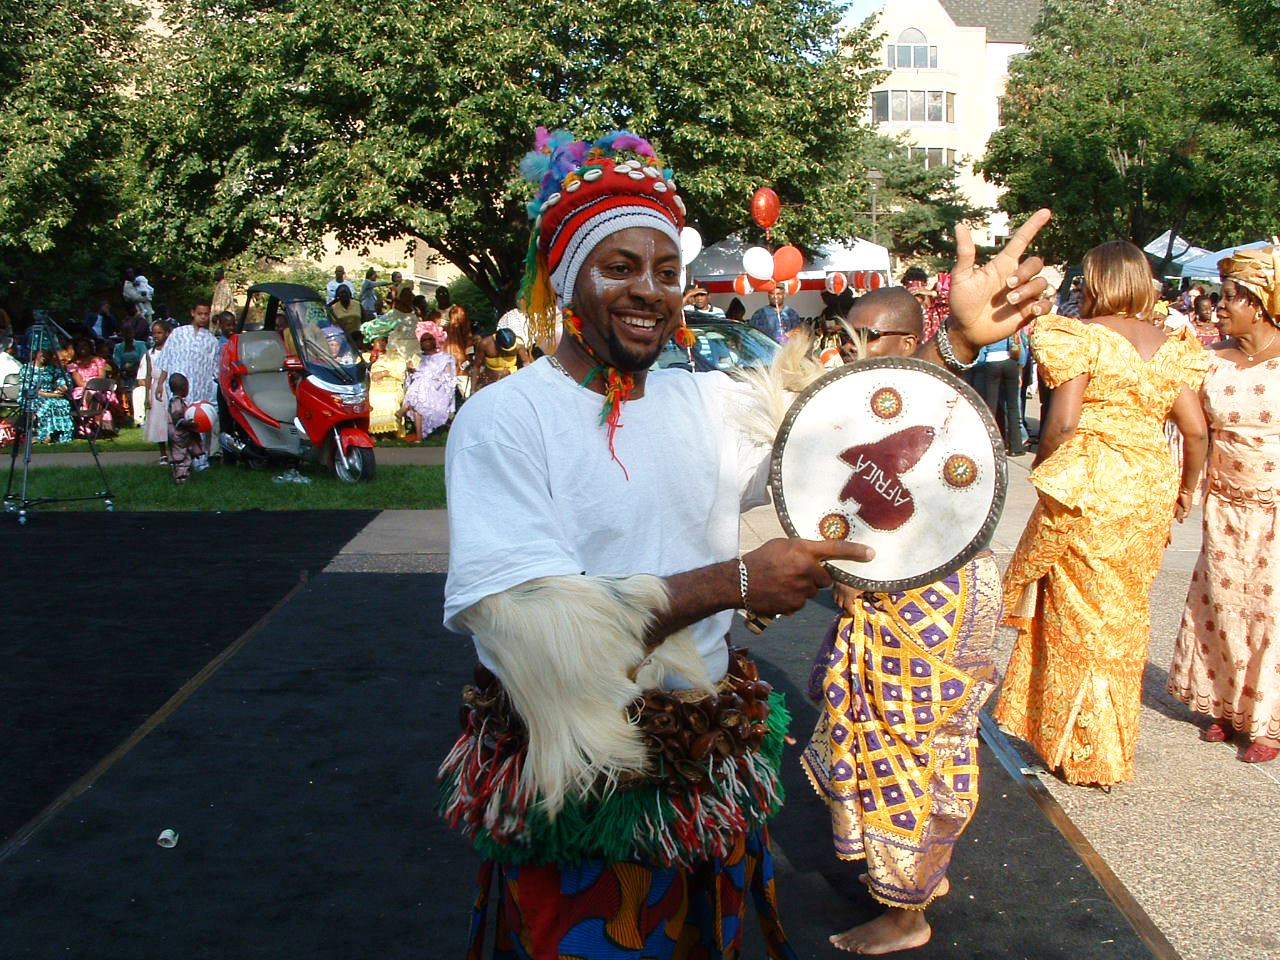 photo of an African man celebrating at IgboFest